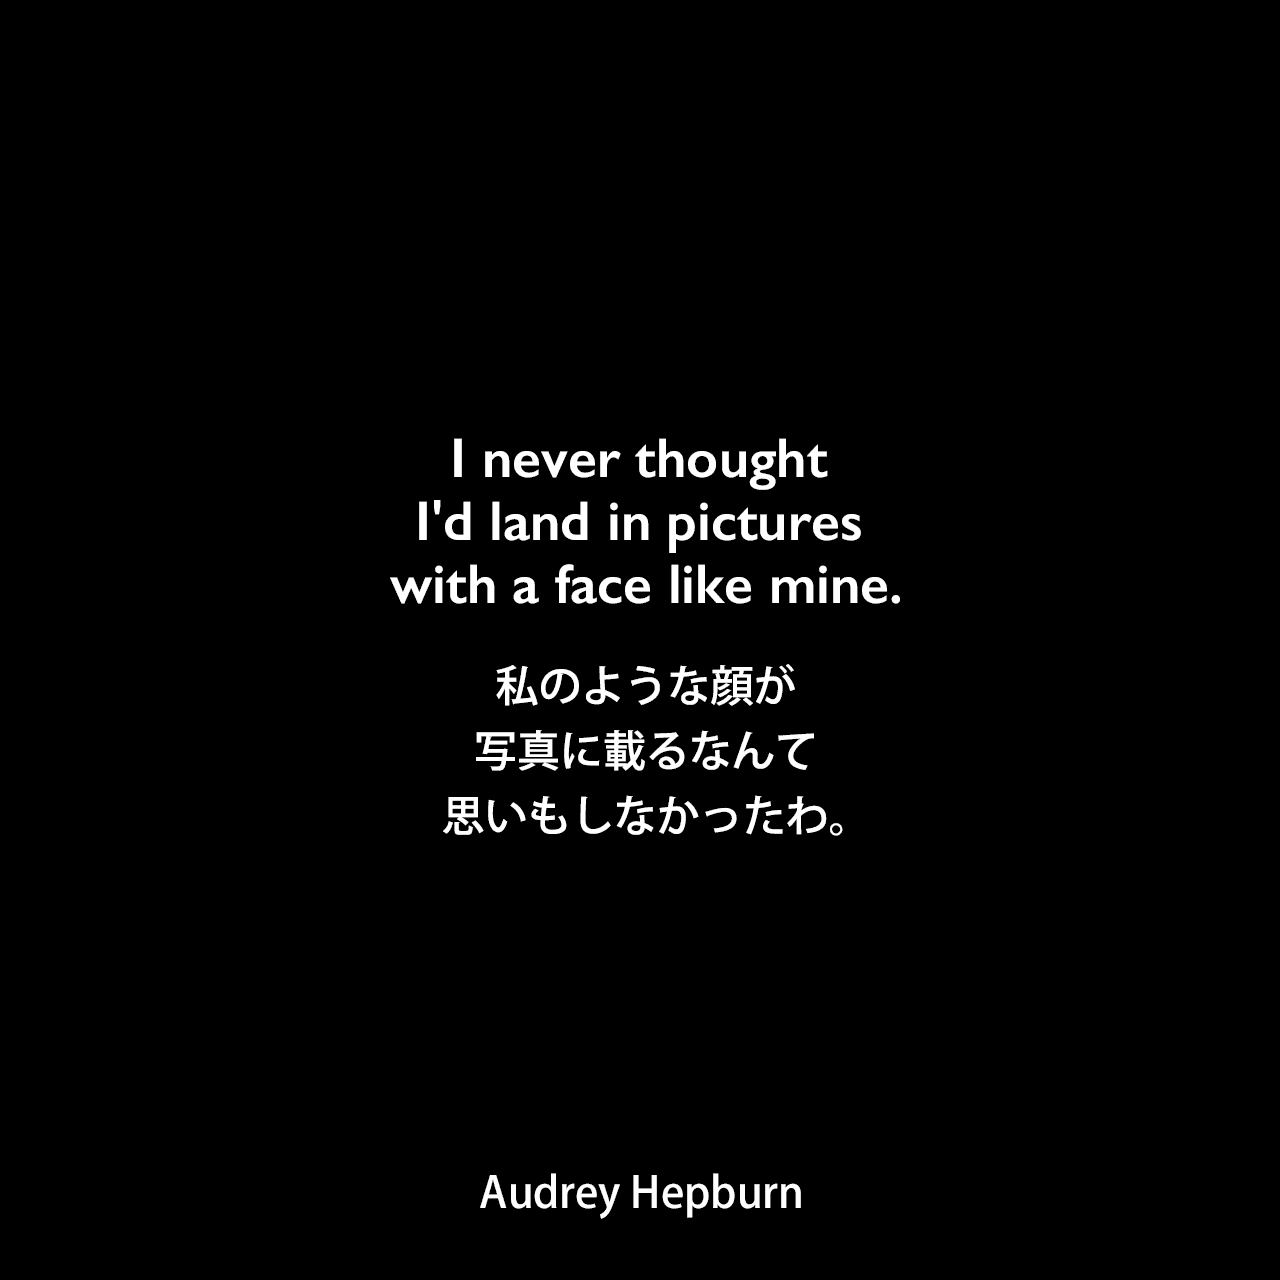 I never thought I'd land in pictures with a face like mine.私のような顔が写真に載るなんて思いもしなかったわ。Audrey Hepburn